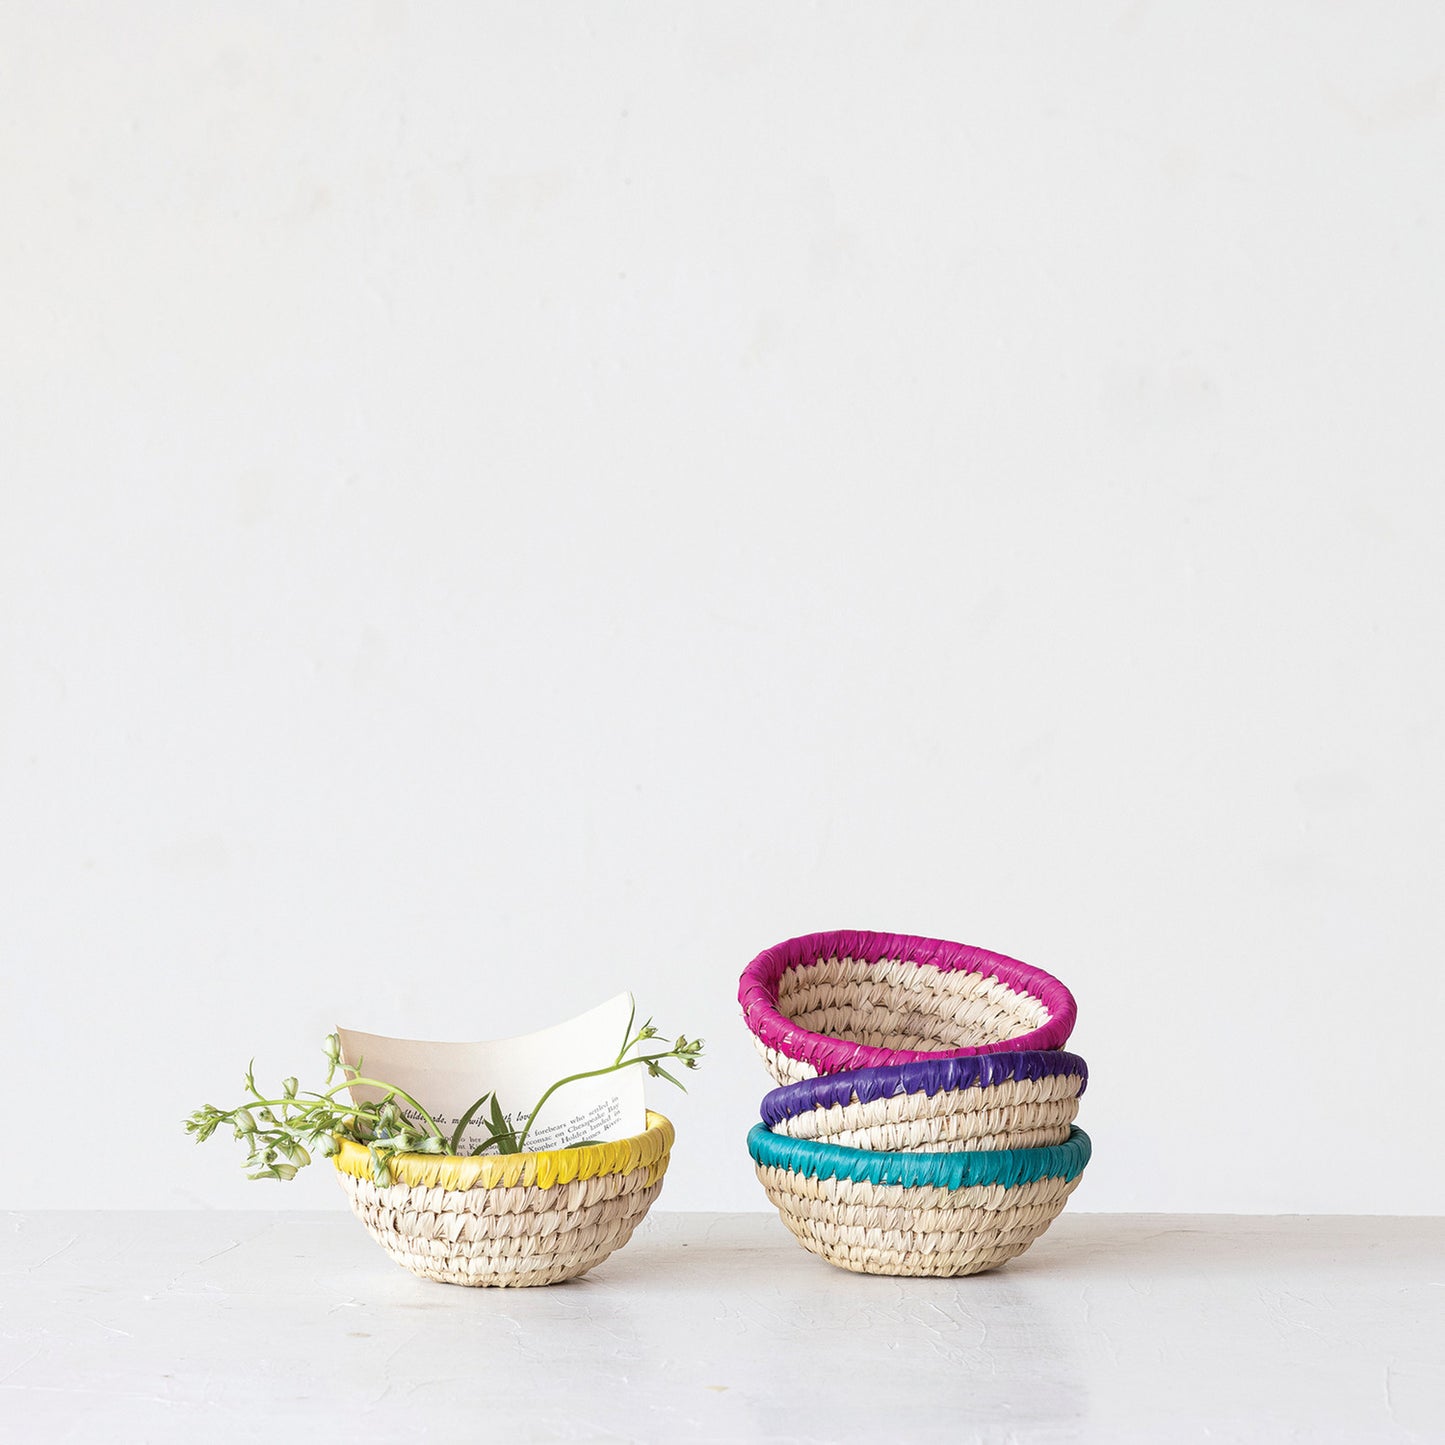 Decorative Hand-Woven Grass & Date Leaf Basket With Colored Rim